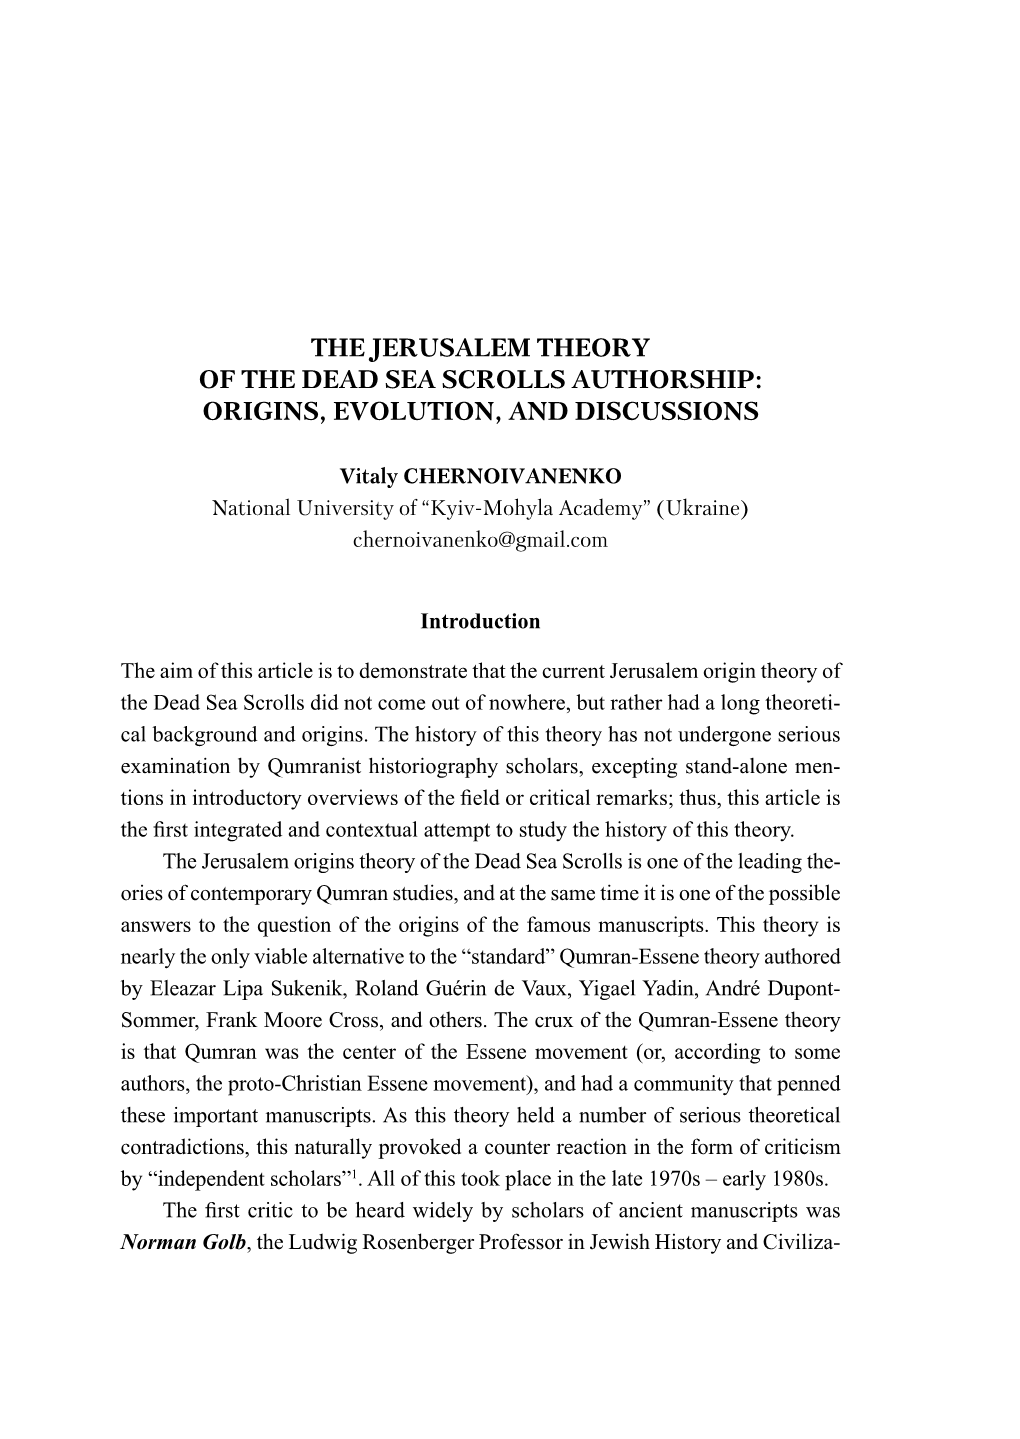 The Jerusalem Theory of the Dead Sea Scrolls Authorship: Origins, Evolution, and Discussions